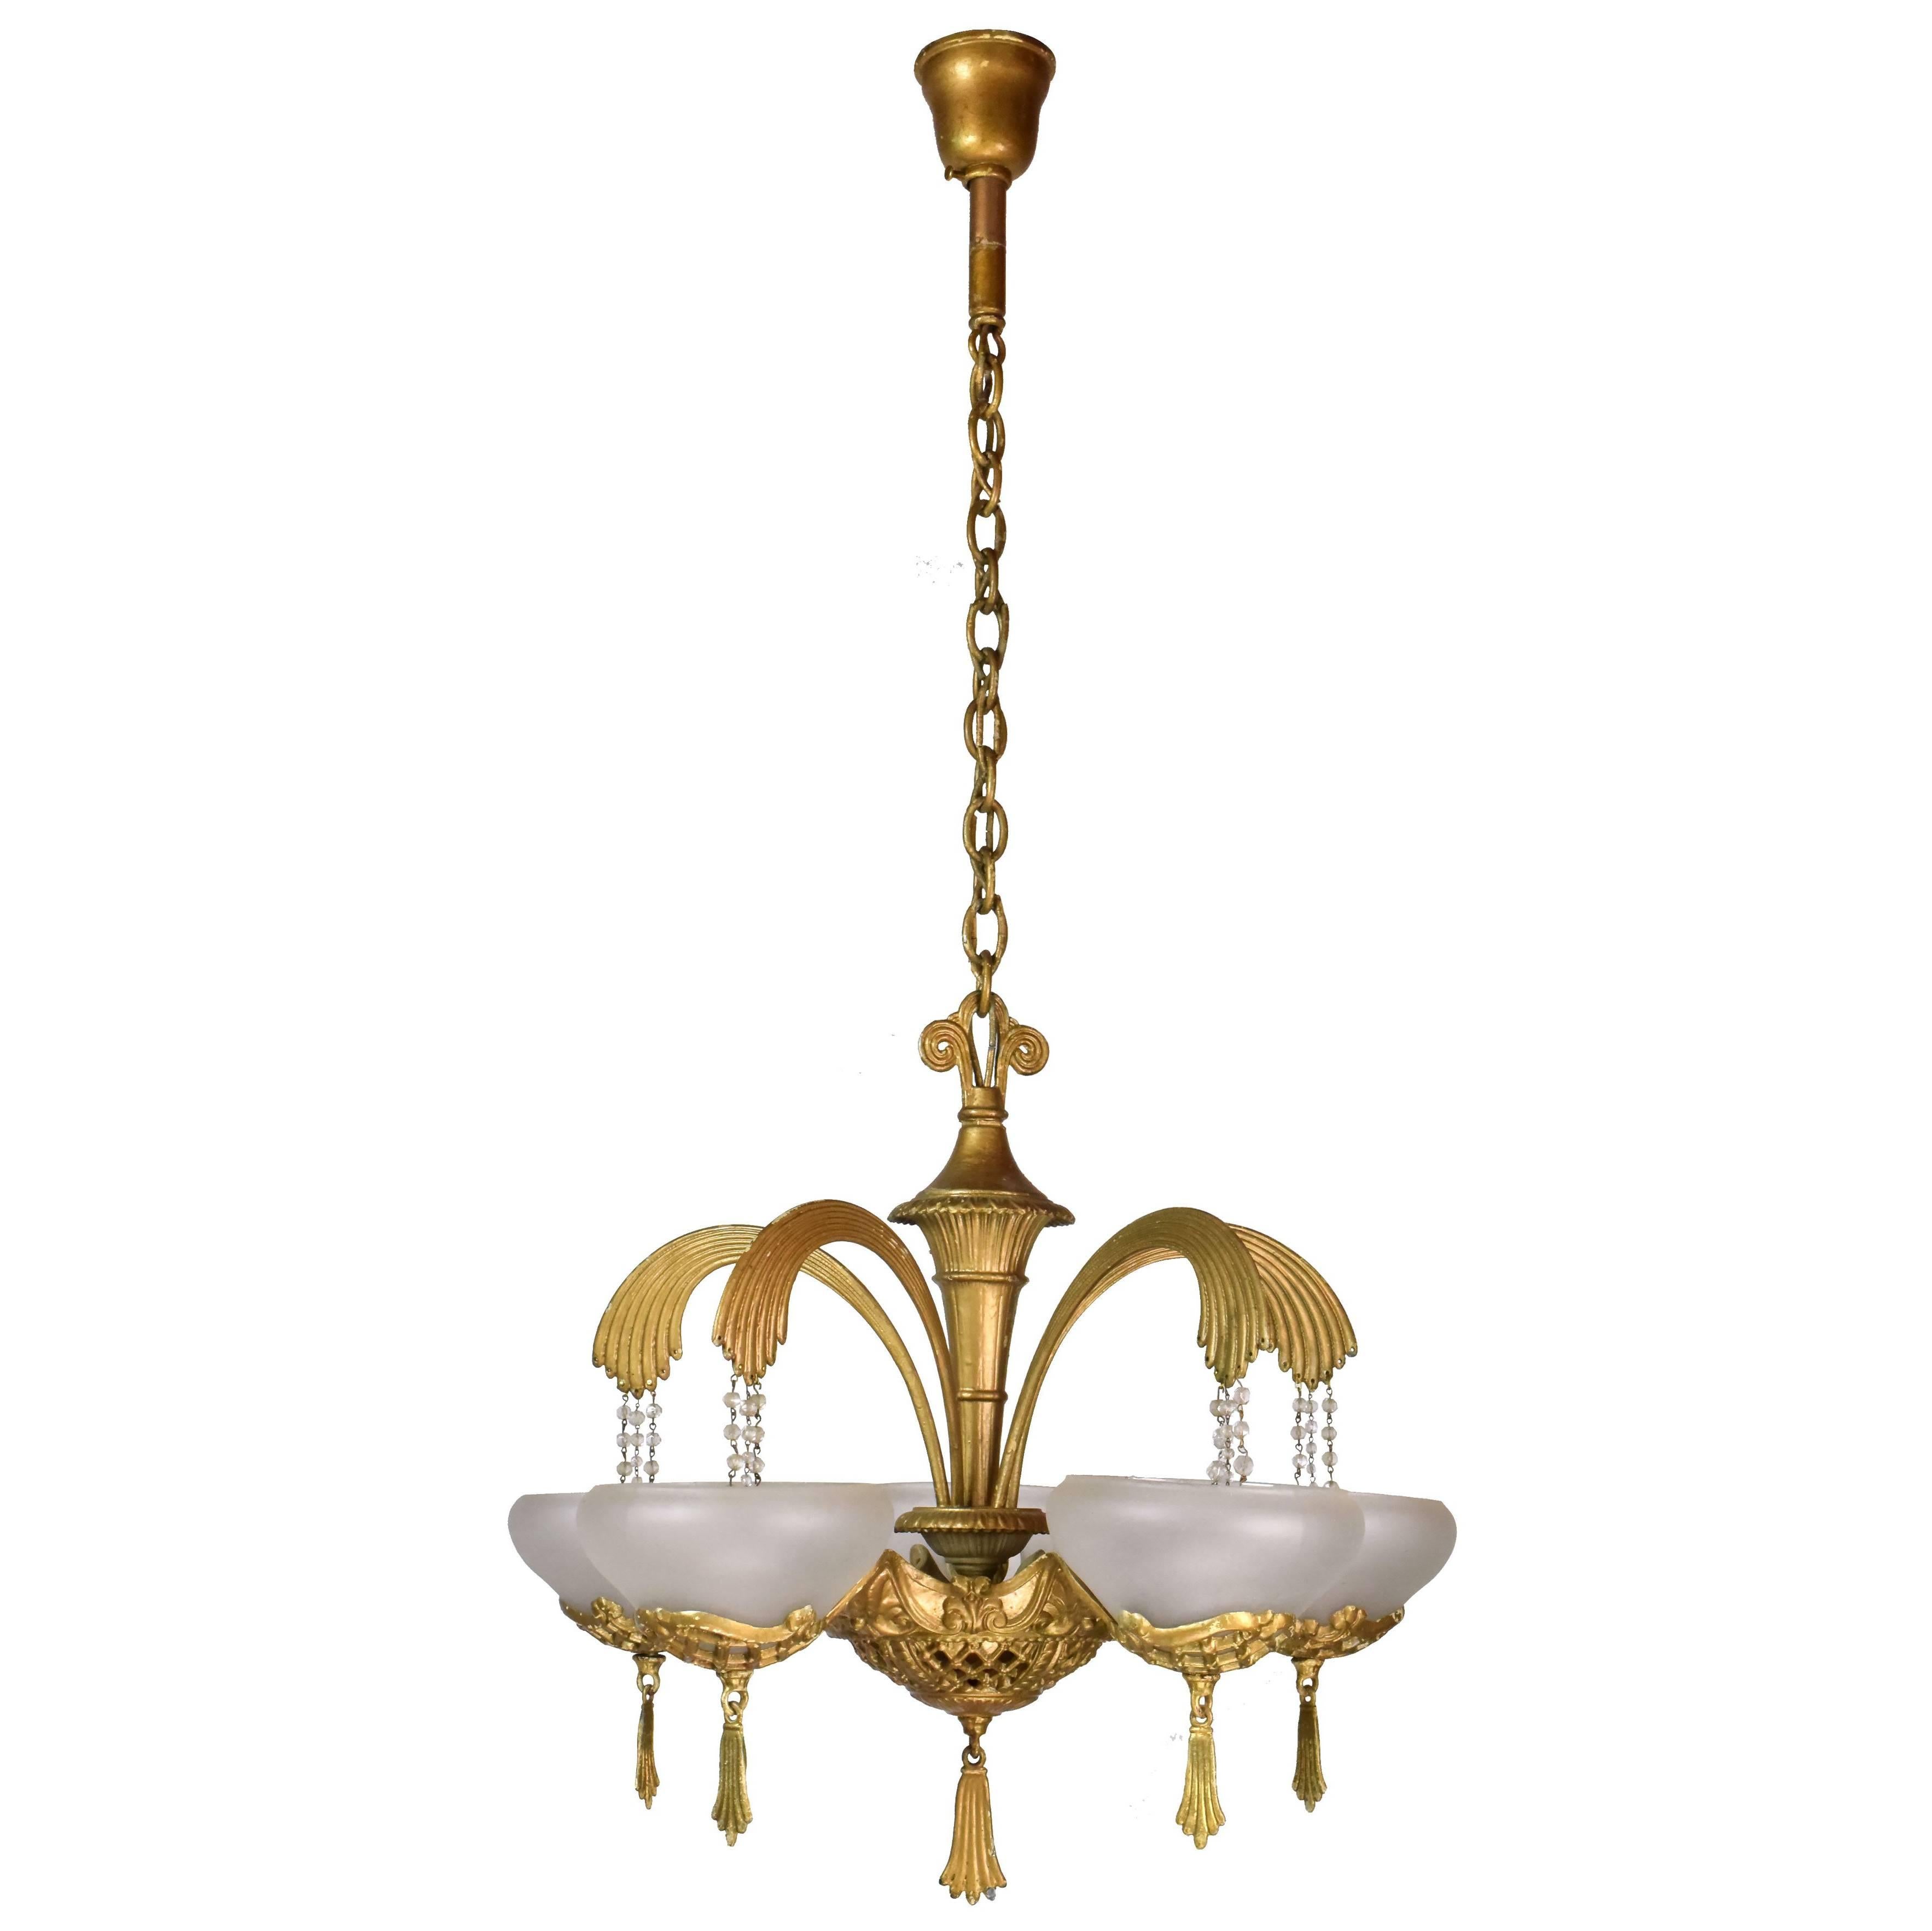 Art Deco Five Arm Brass Chandelier with Shades